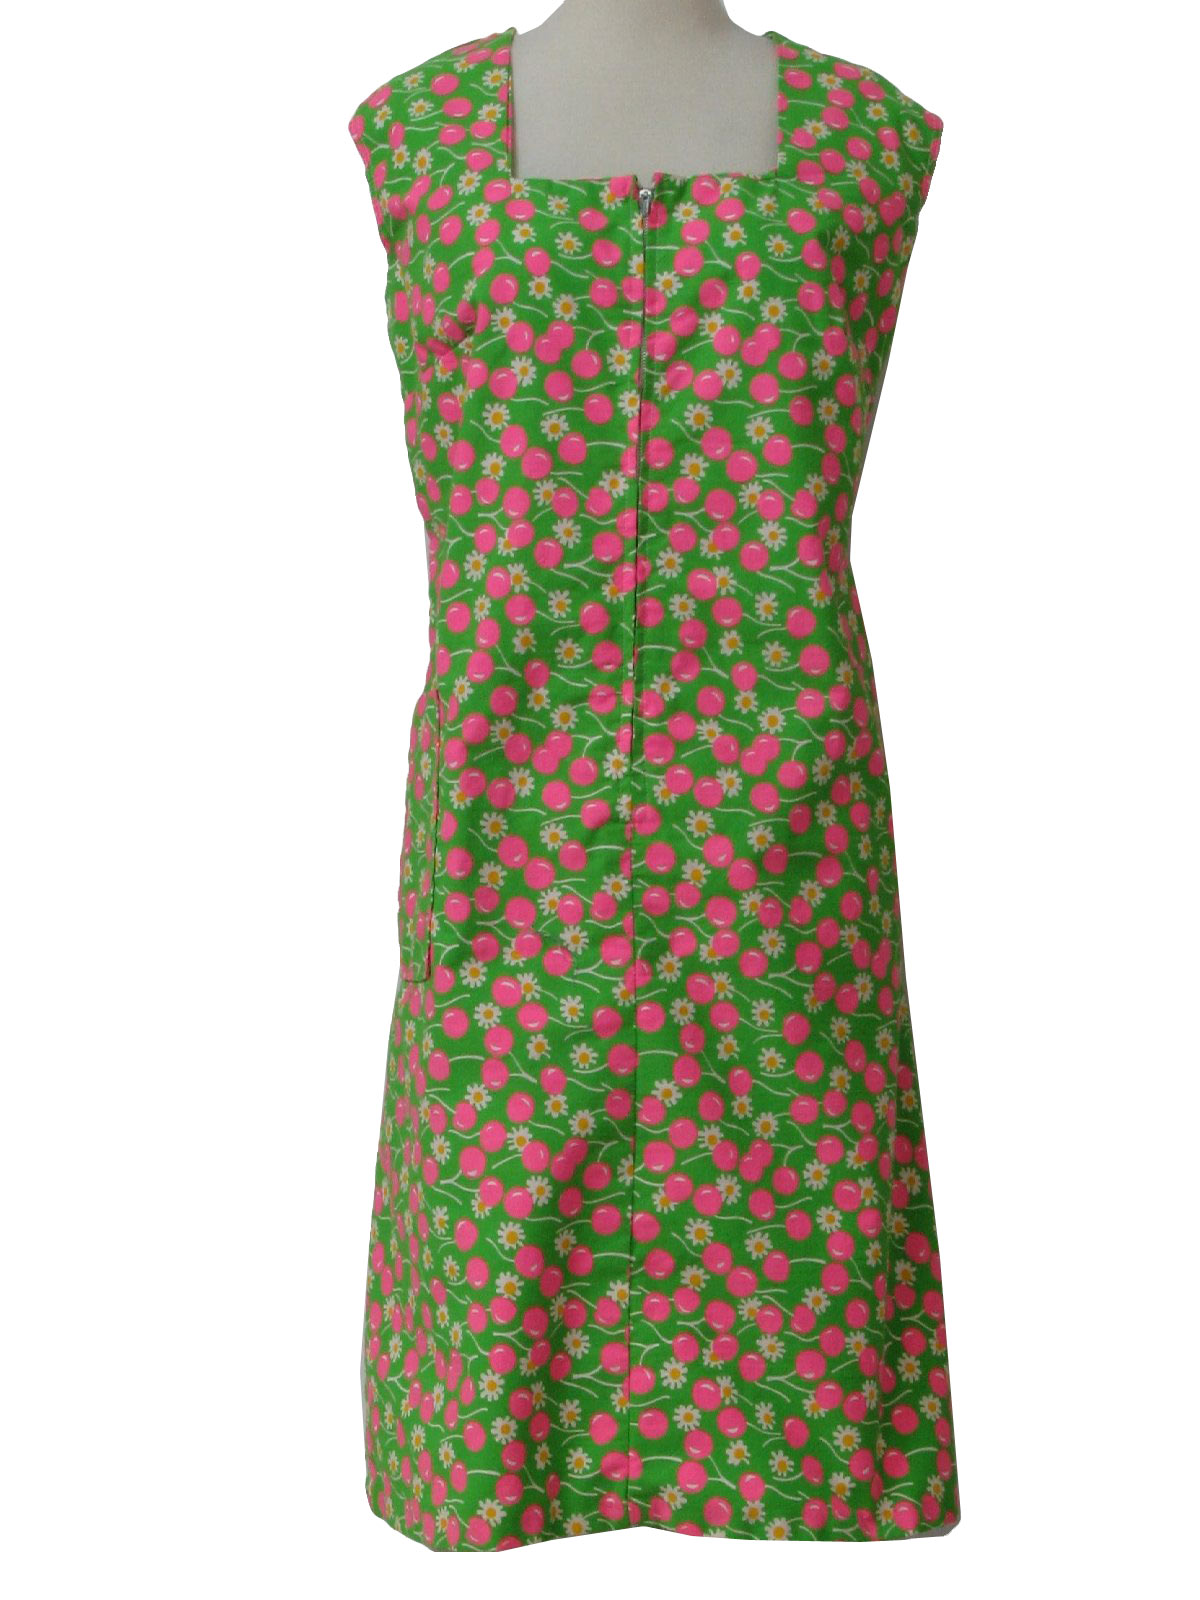 Chatelaine 1960s Vintage Dress: 60s -Chatelaine- Womens lime, hot pink ...